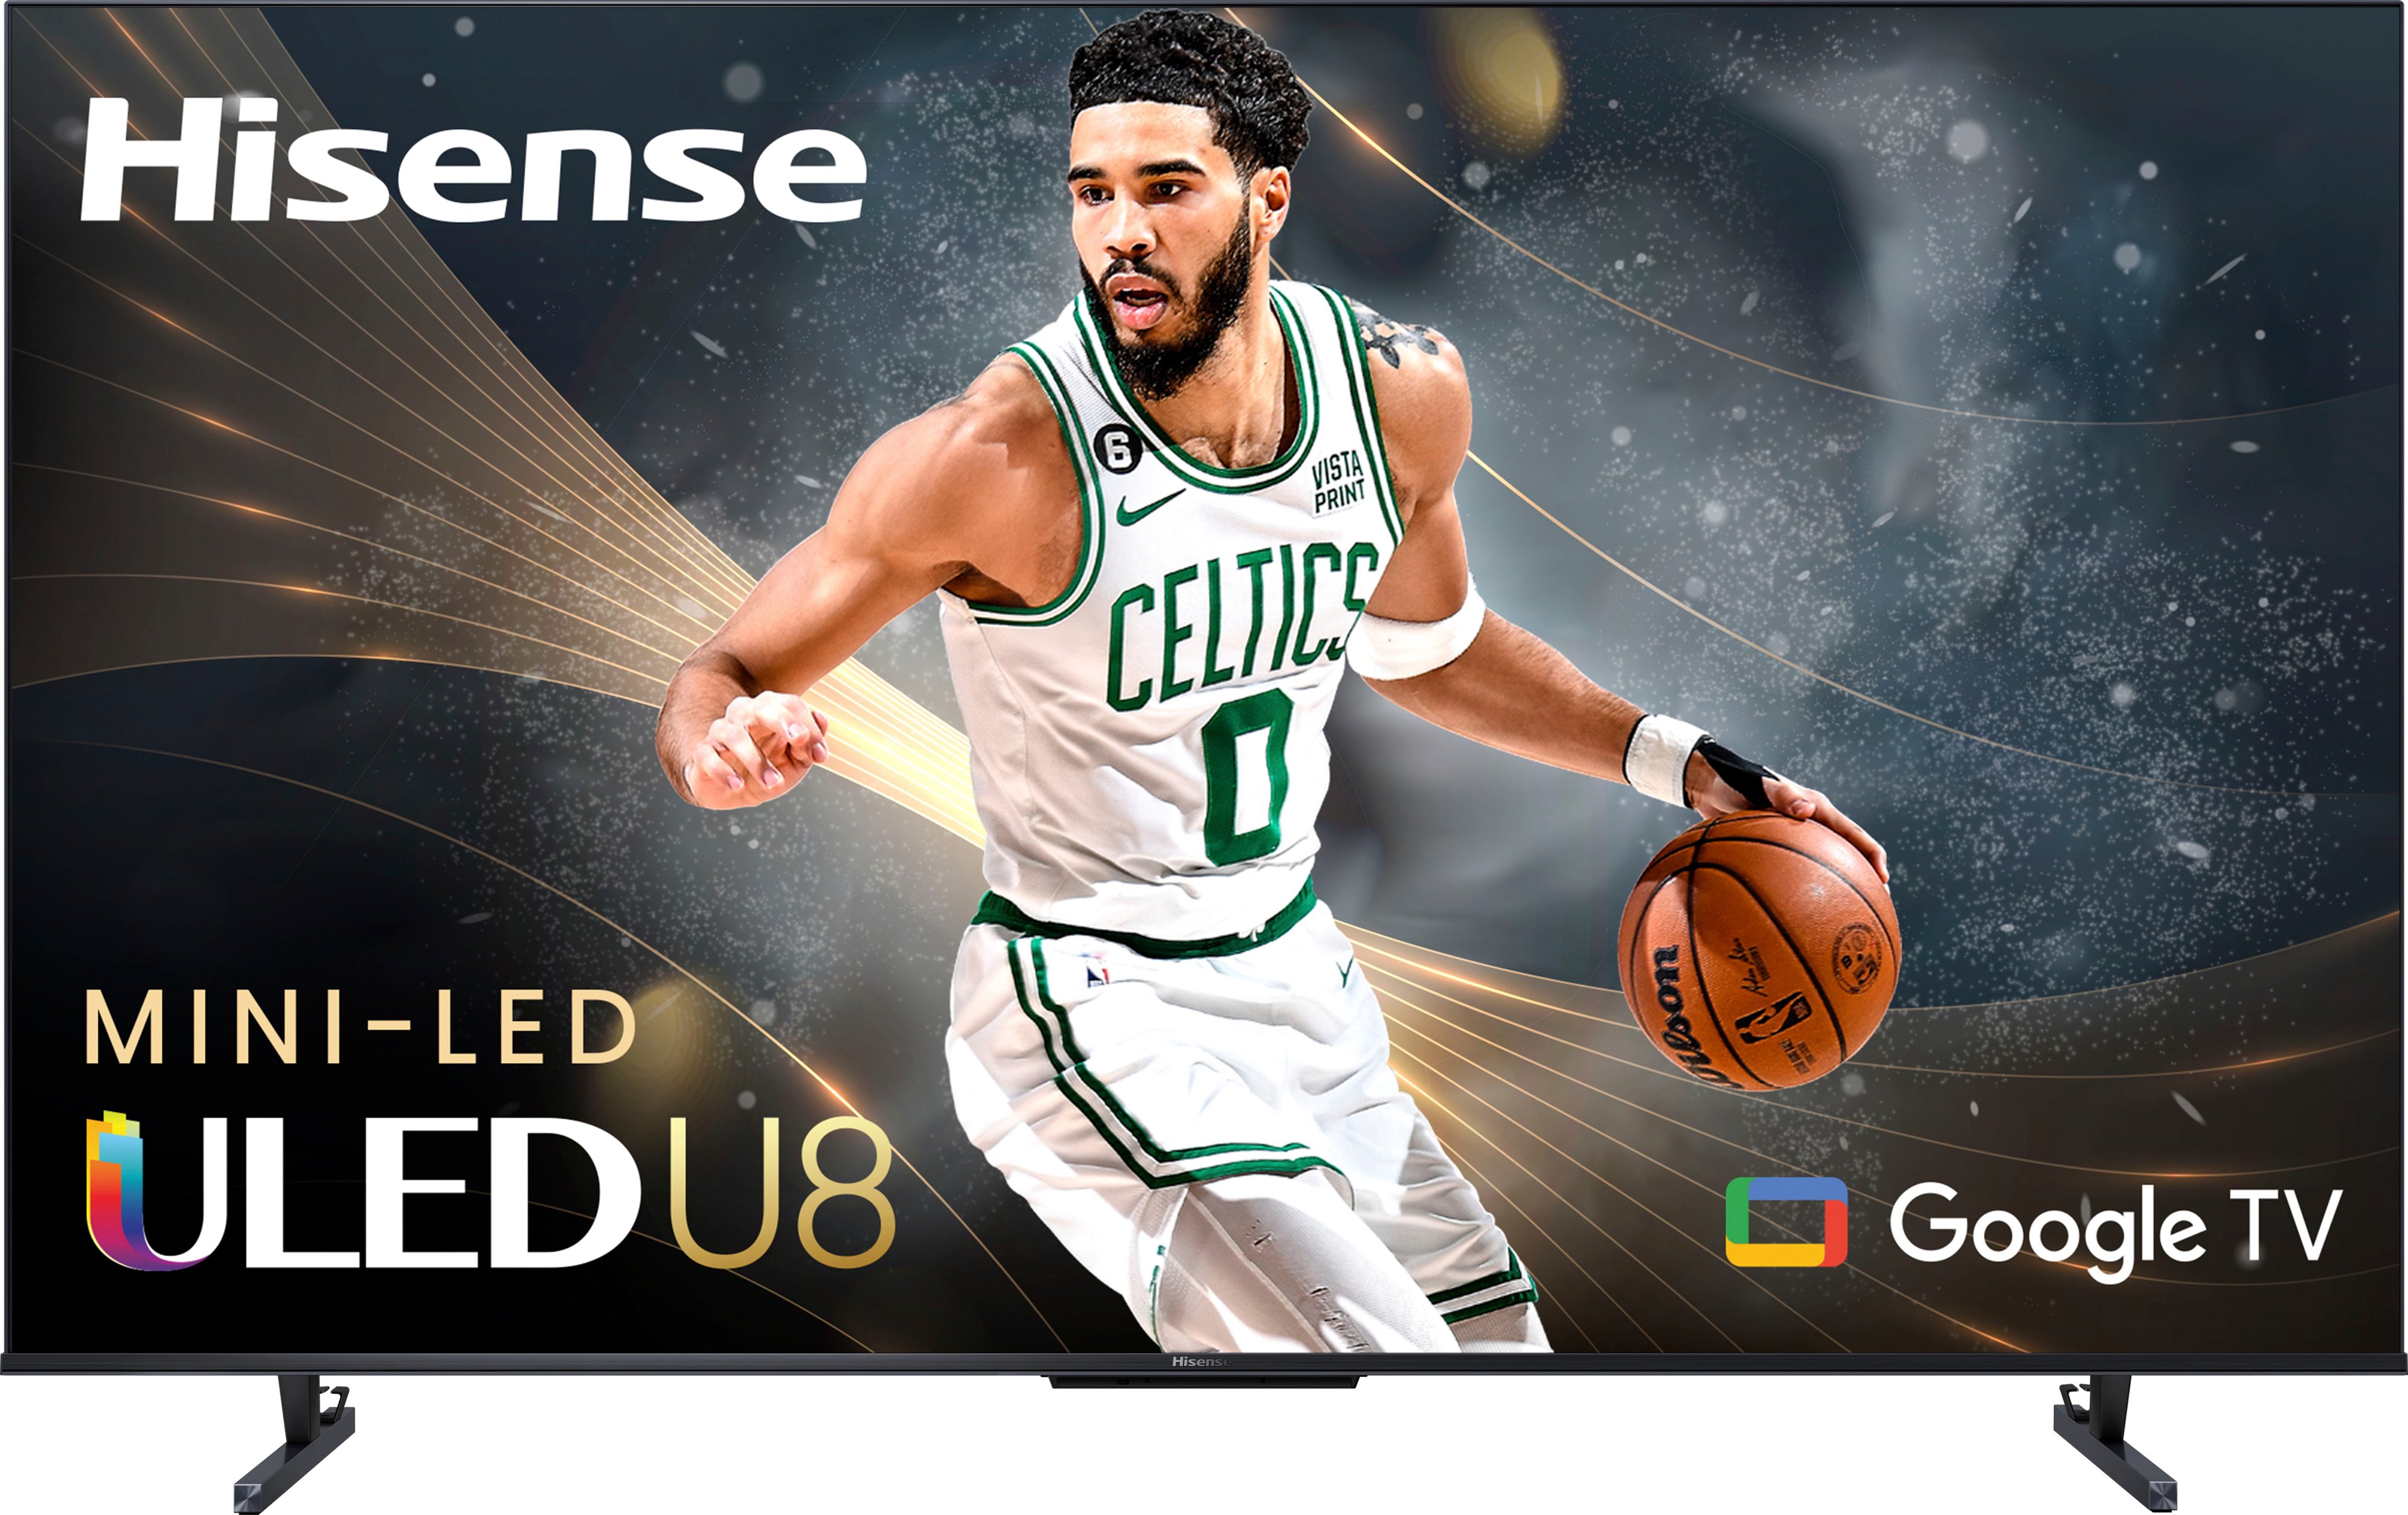 2023 Hisense U7K 4K Mini LED TVs specifications and features for USA